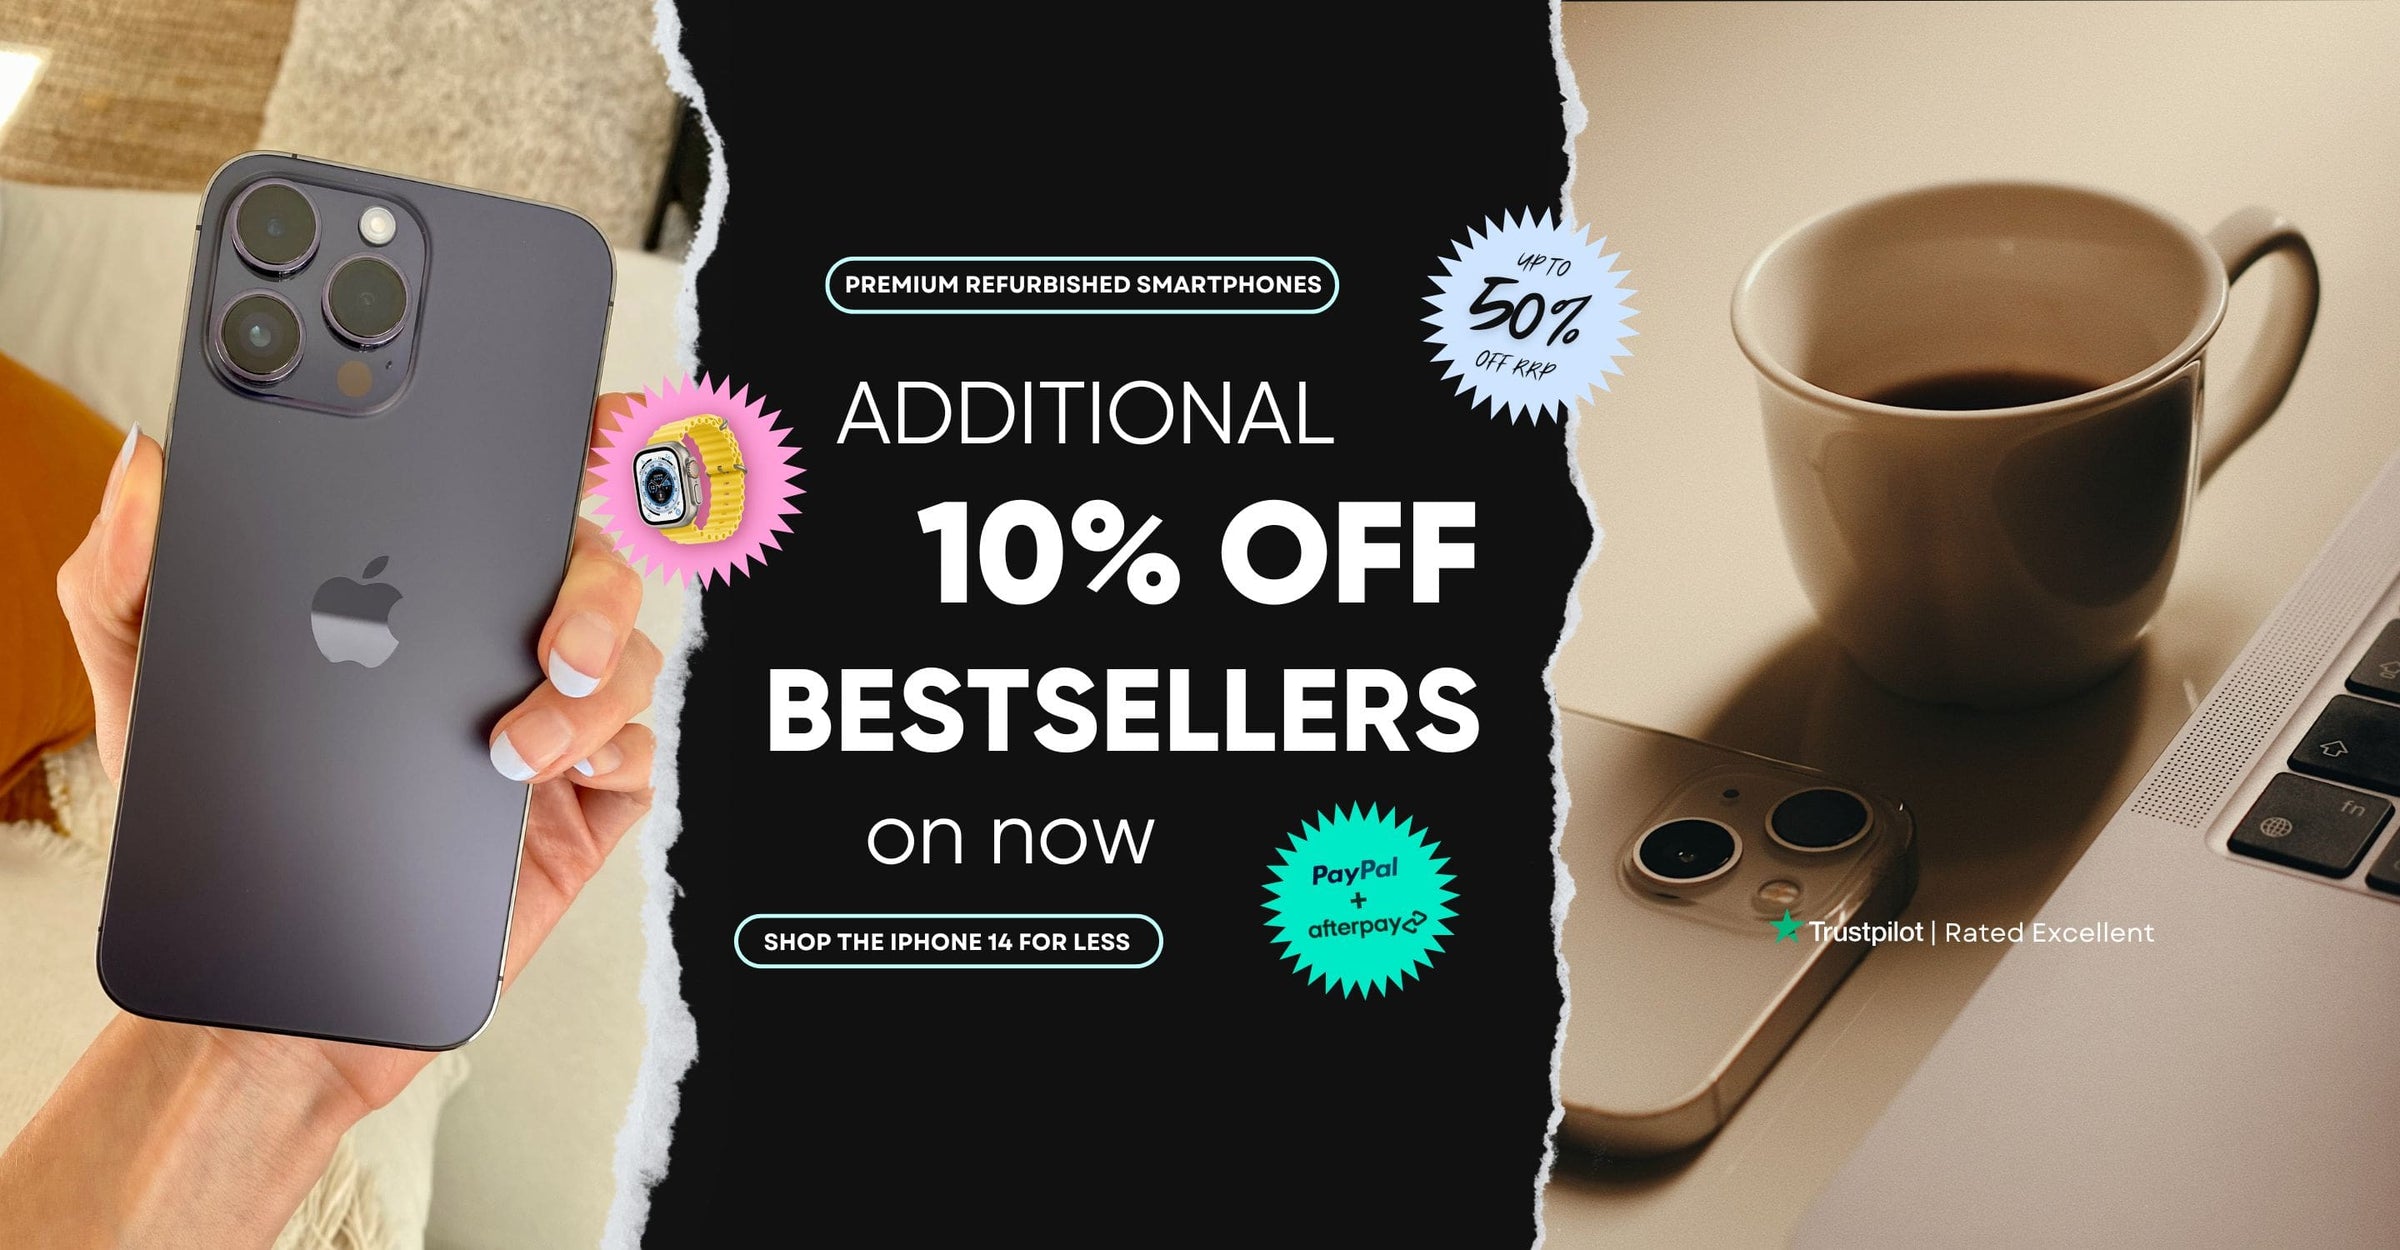 Refurbished iPhones | 10% off Bestsellers in May with Frank Mobile